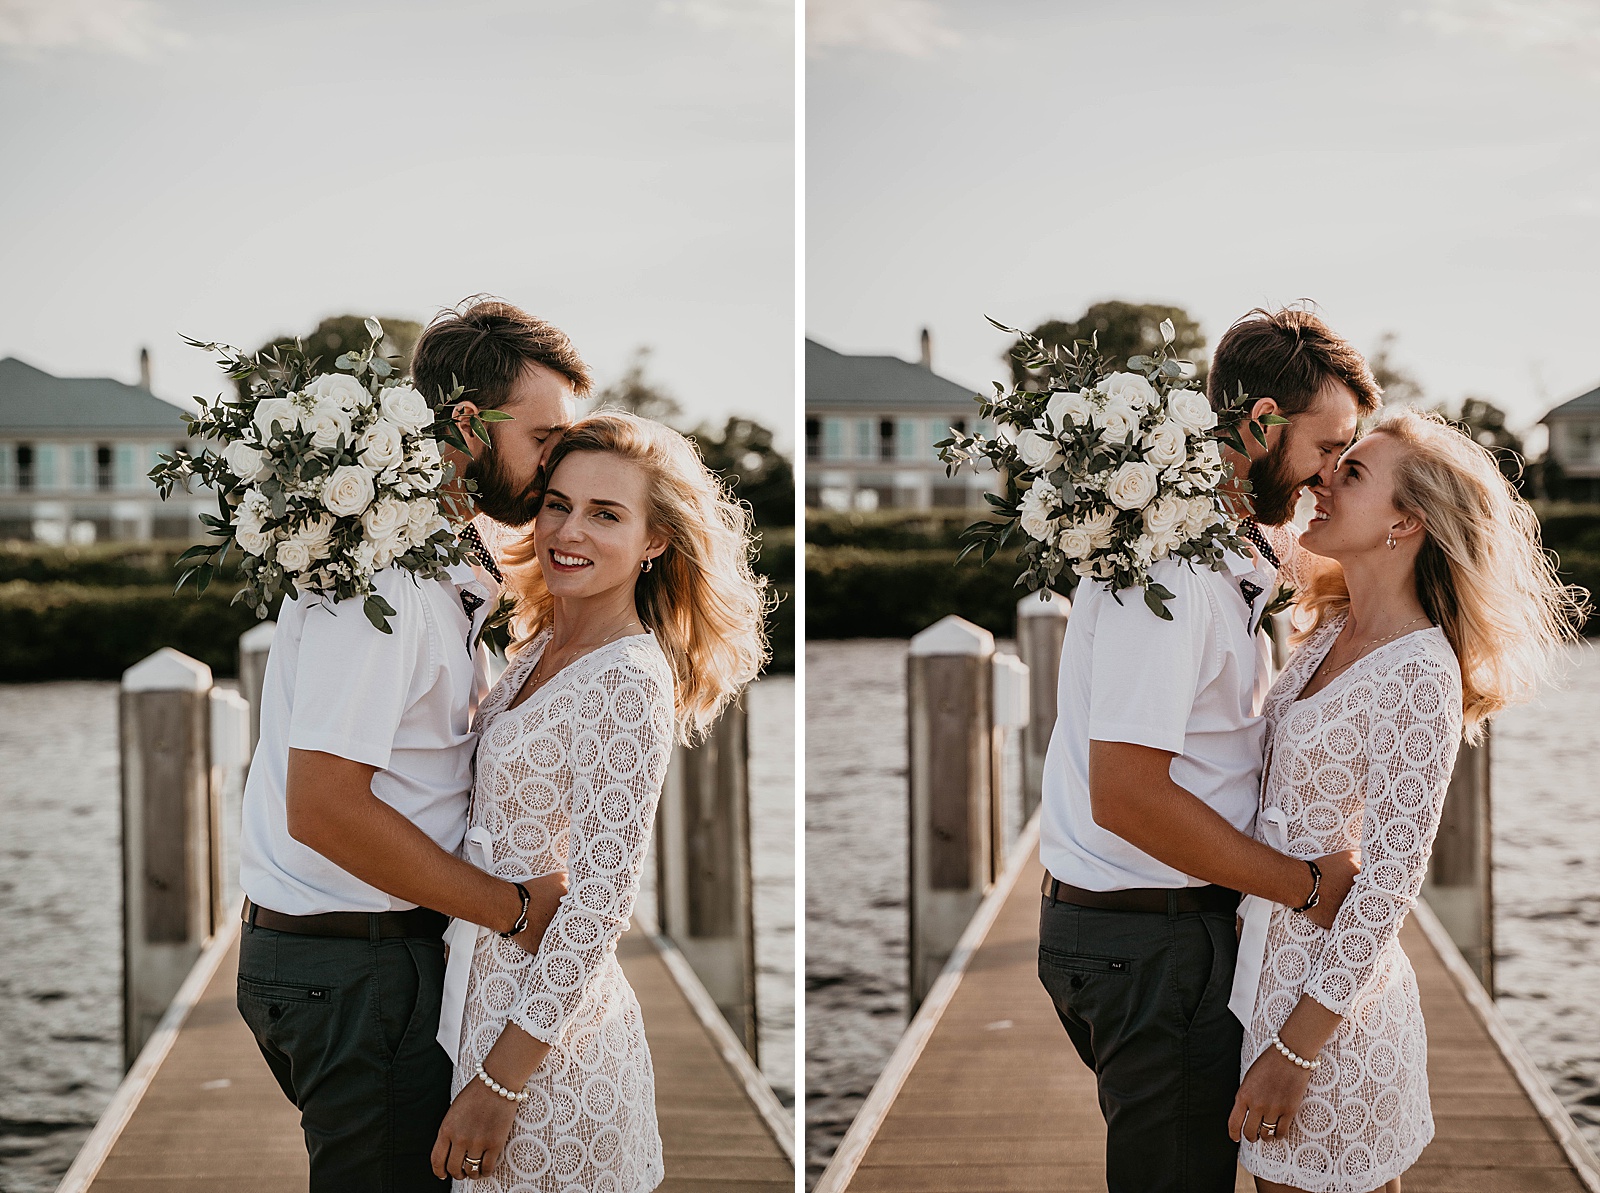 South Florida Waterfront Elopement bride and groom portrait captured by South Florida Elopement Photographer, Krystal Capone Photography